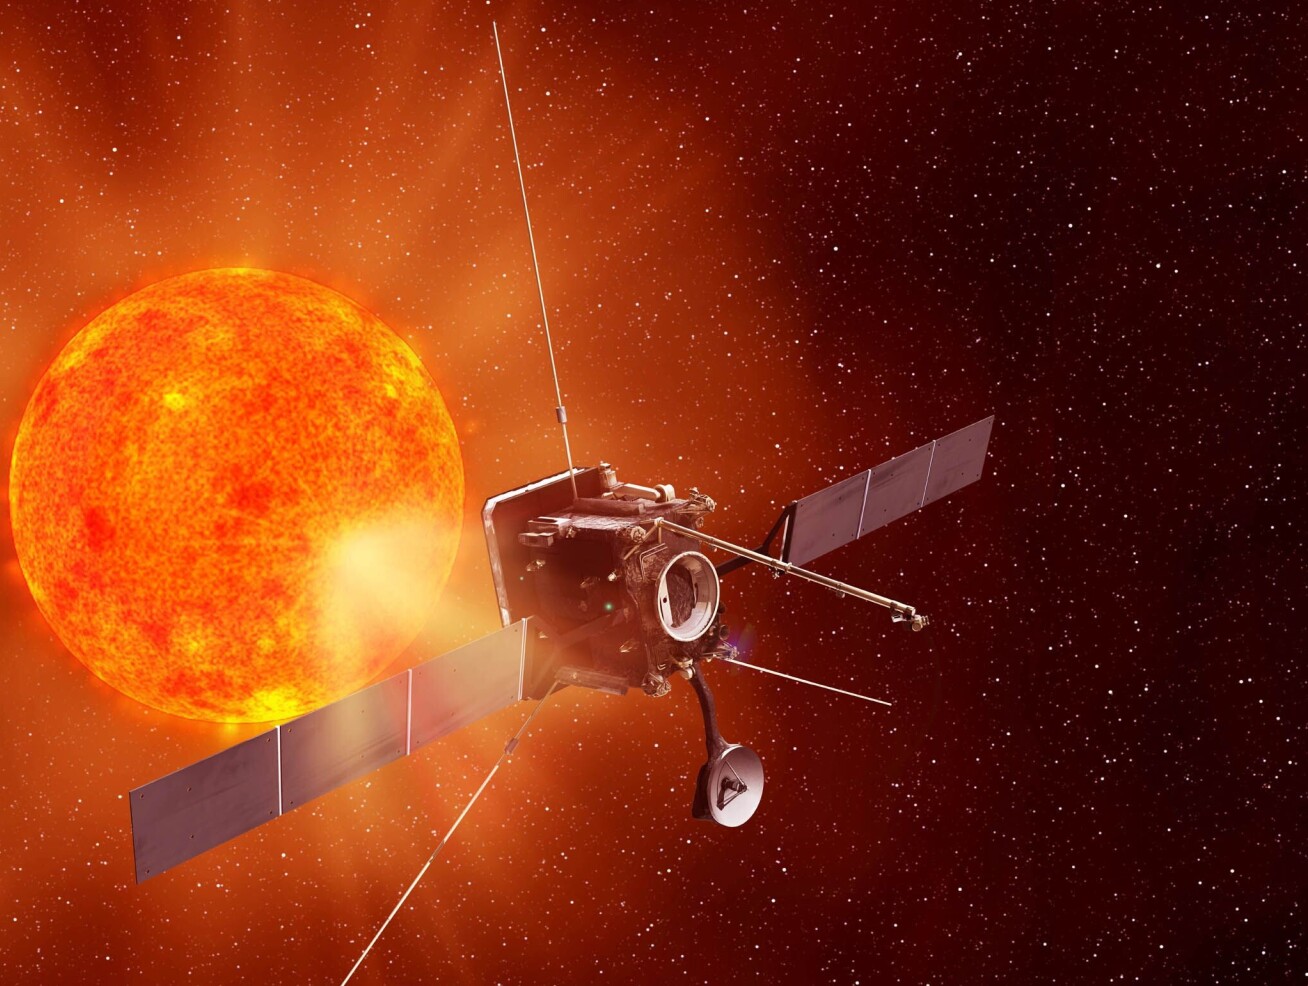 A CGI image of the Sun and a rocket